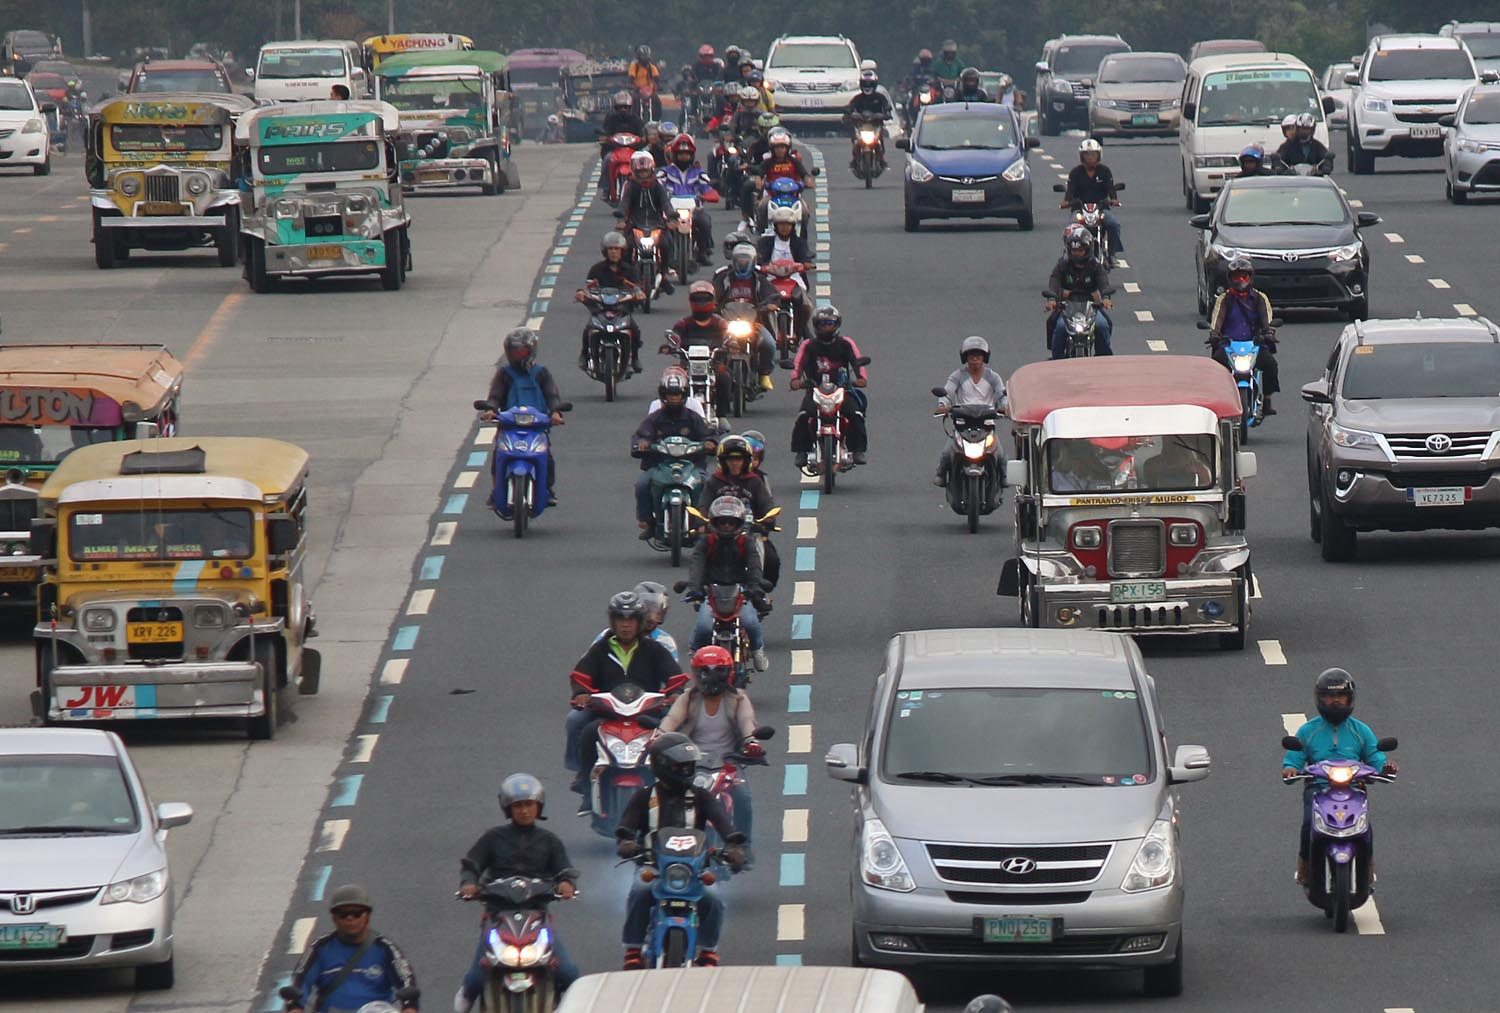 Gov’t should require training for motorcycle riders – Angkas